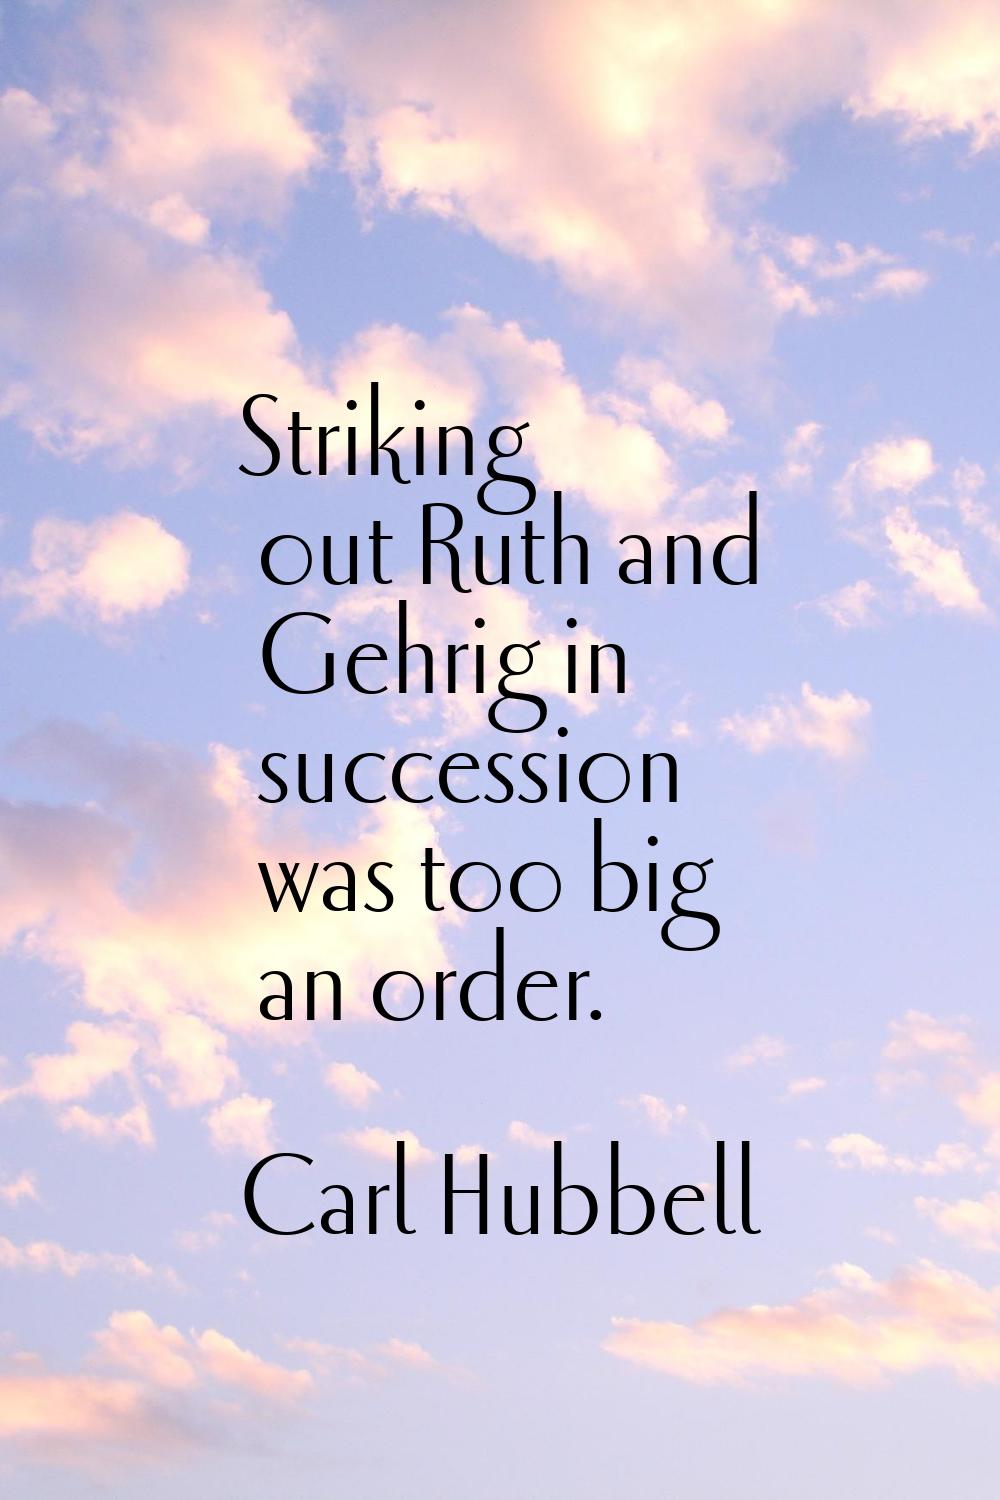 Striking out Ruth and Gehrig in succession was too big an order.